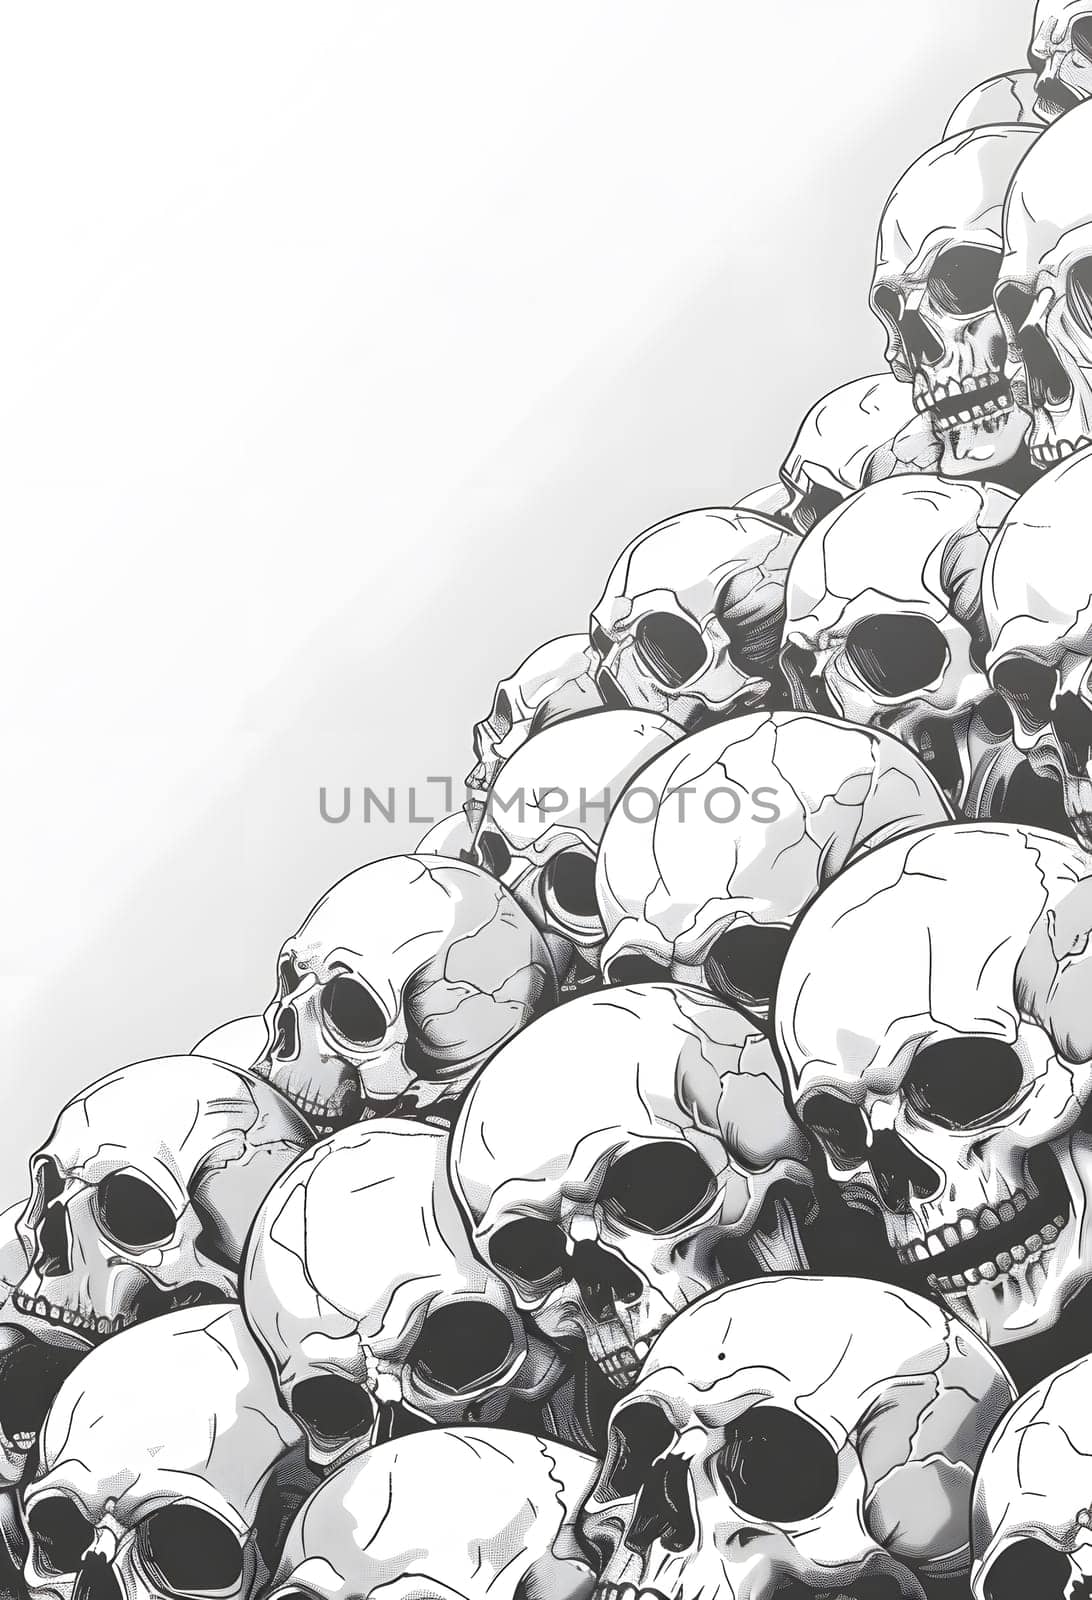 A stack of insect skulls in monochrome photography on a white background. The pattern of membranewinged insects is transformed into a fashion accessory art piece made of metal circles